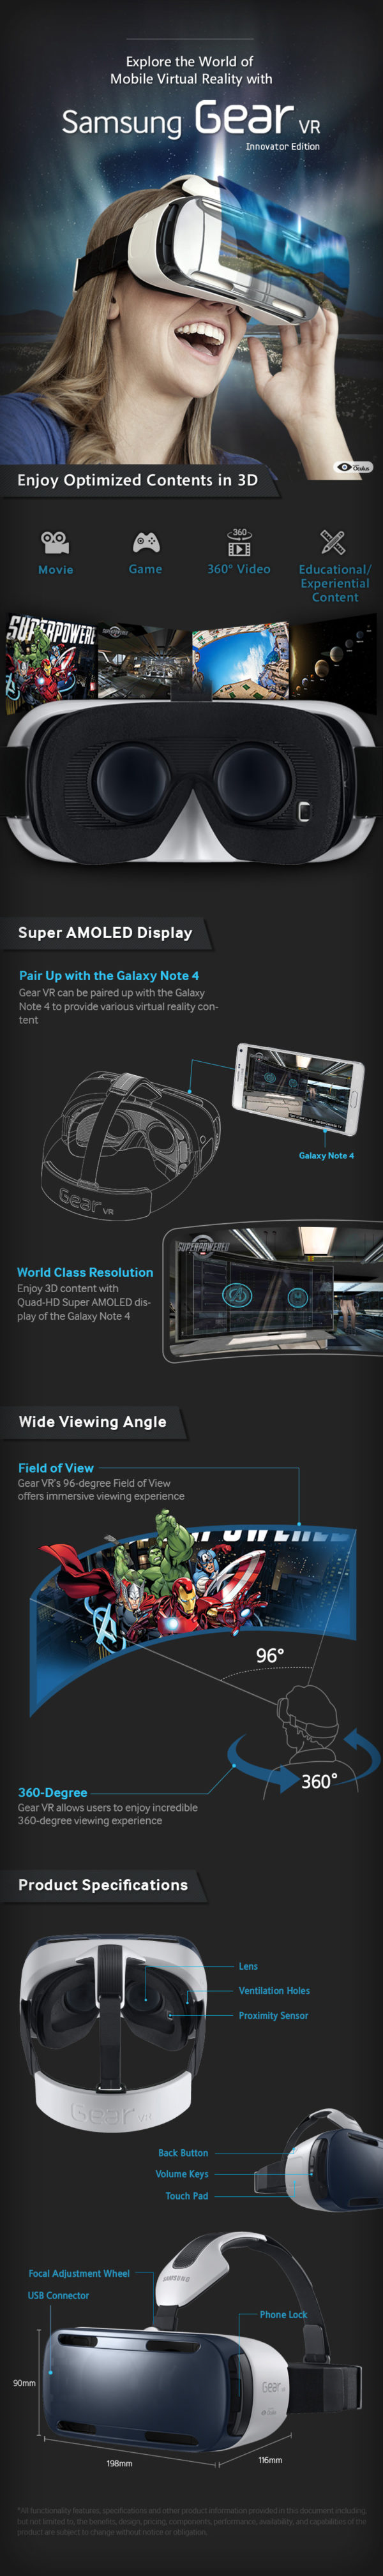 Galaxy_gear-infographic_full_resolution